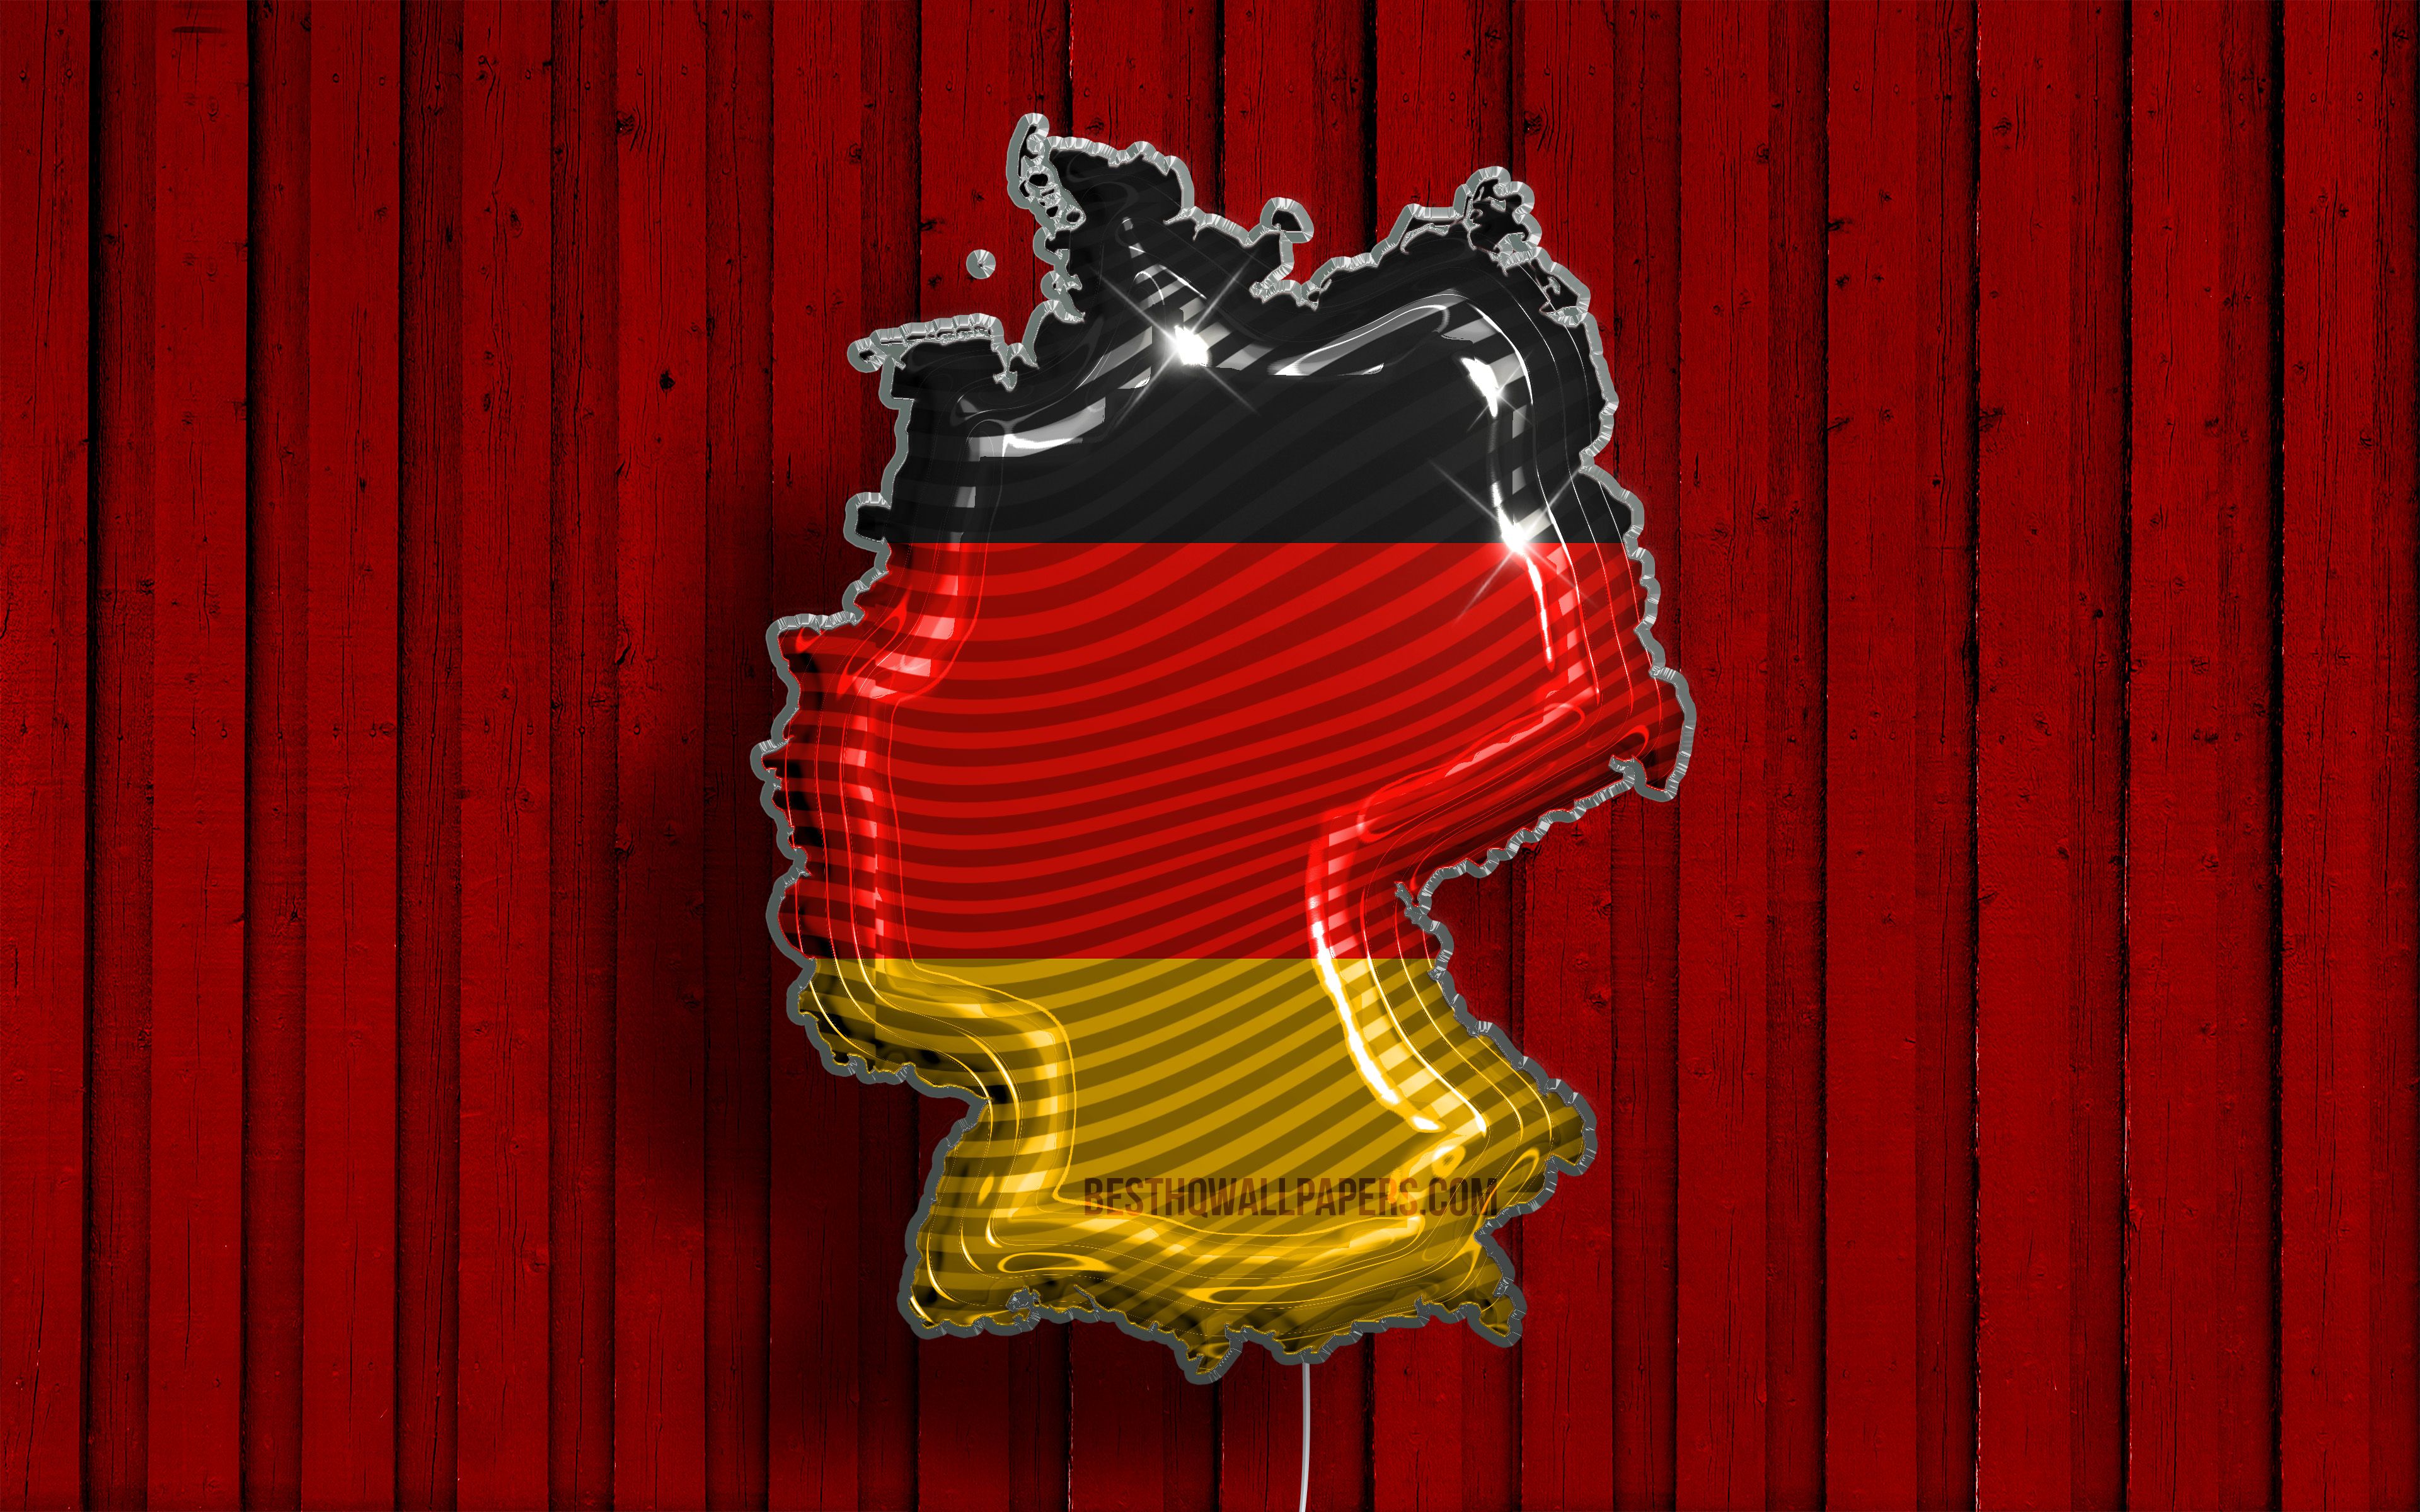 Download wallpaper Germany Realistic Balloons map, 4k, Silhouette of Germany, 3D maps, Germany map, german flag, red wooden background, balloon with german map, creative, map of Germany, 3D Germany Map, german map